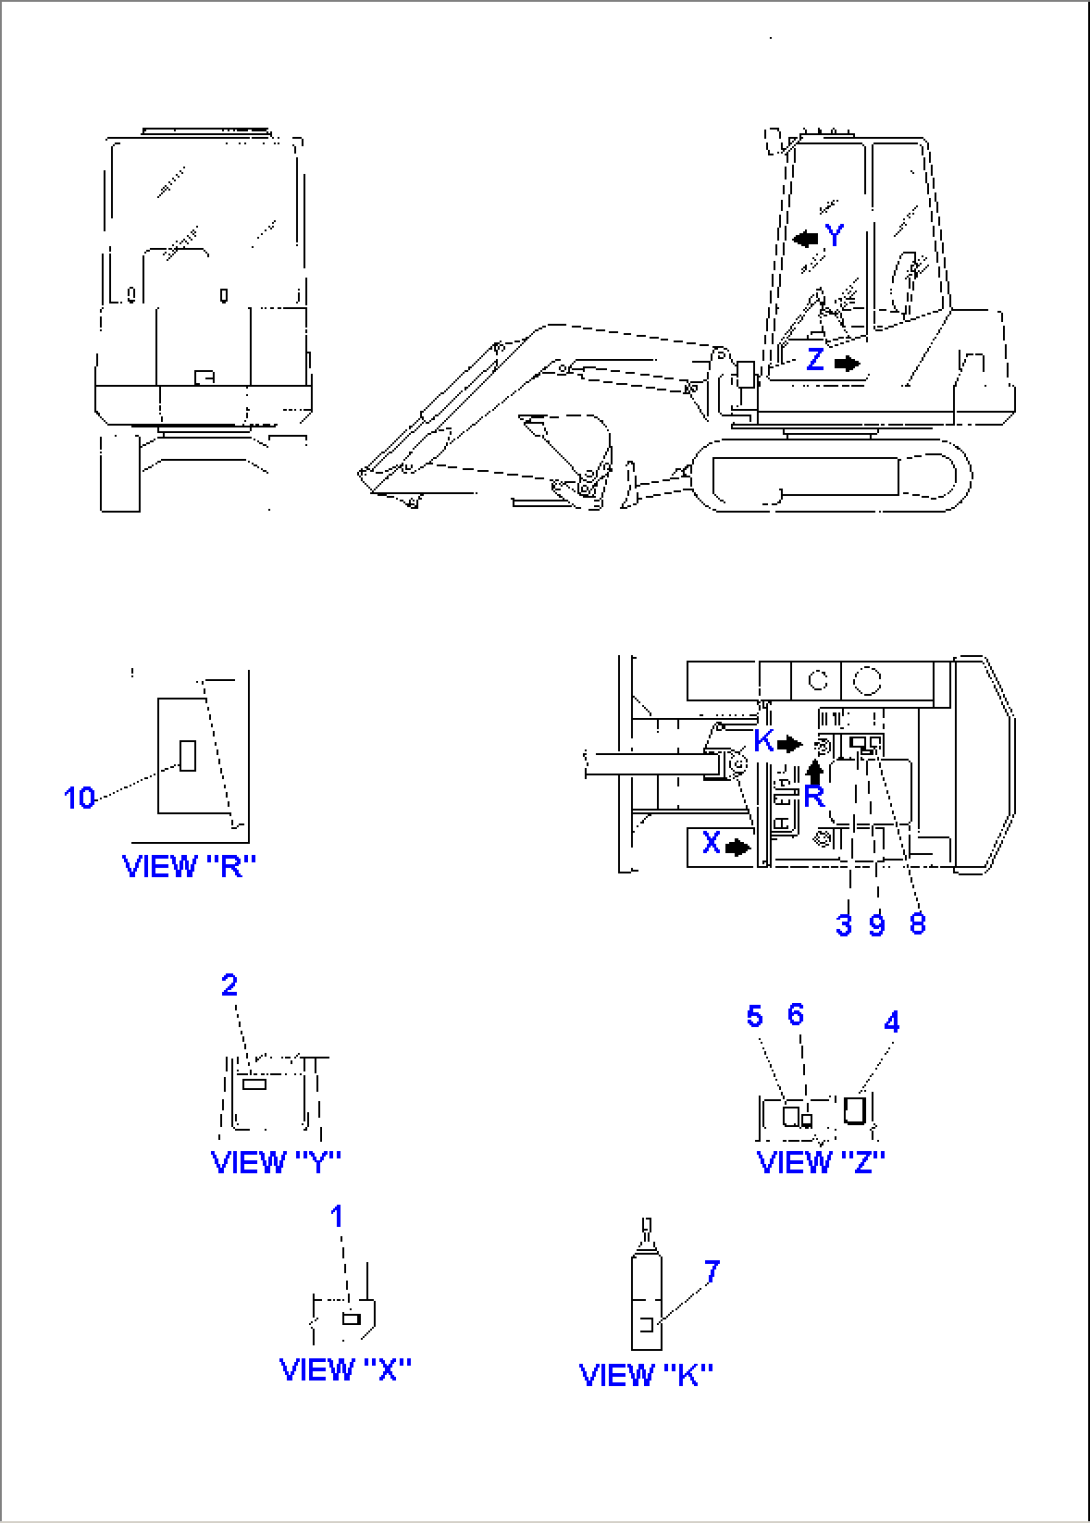 MARKS AND PLATES (FOR OPERATOR